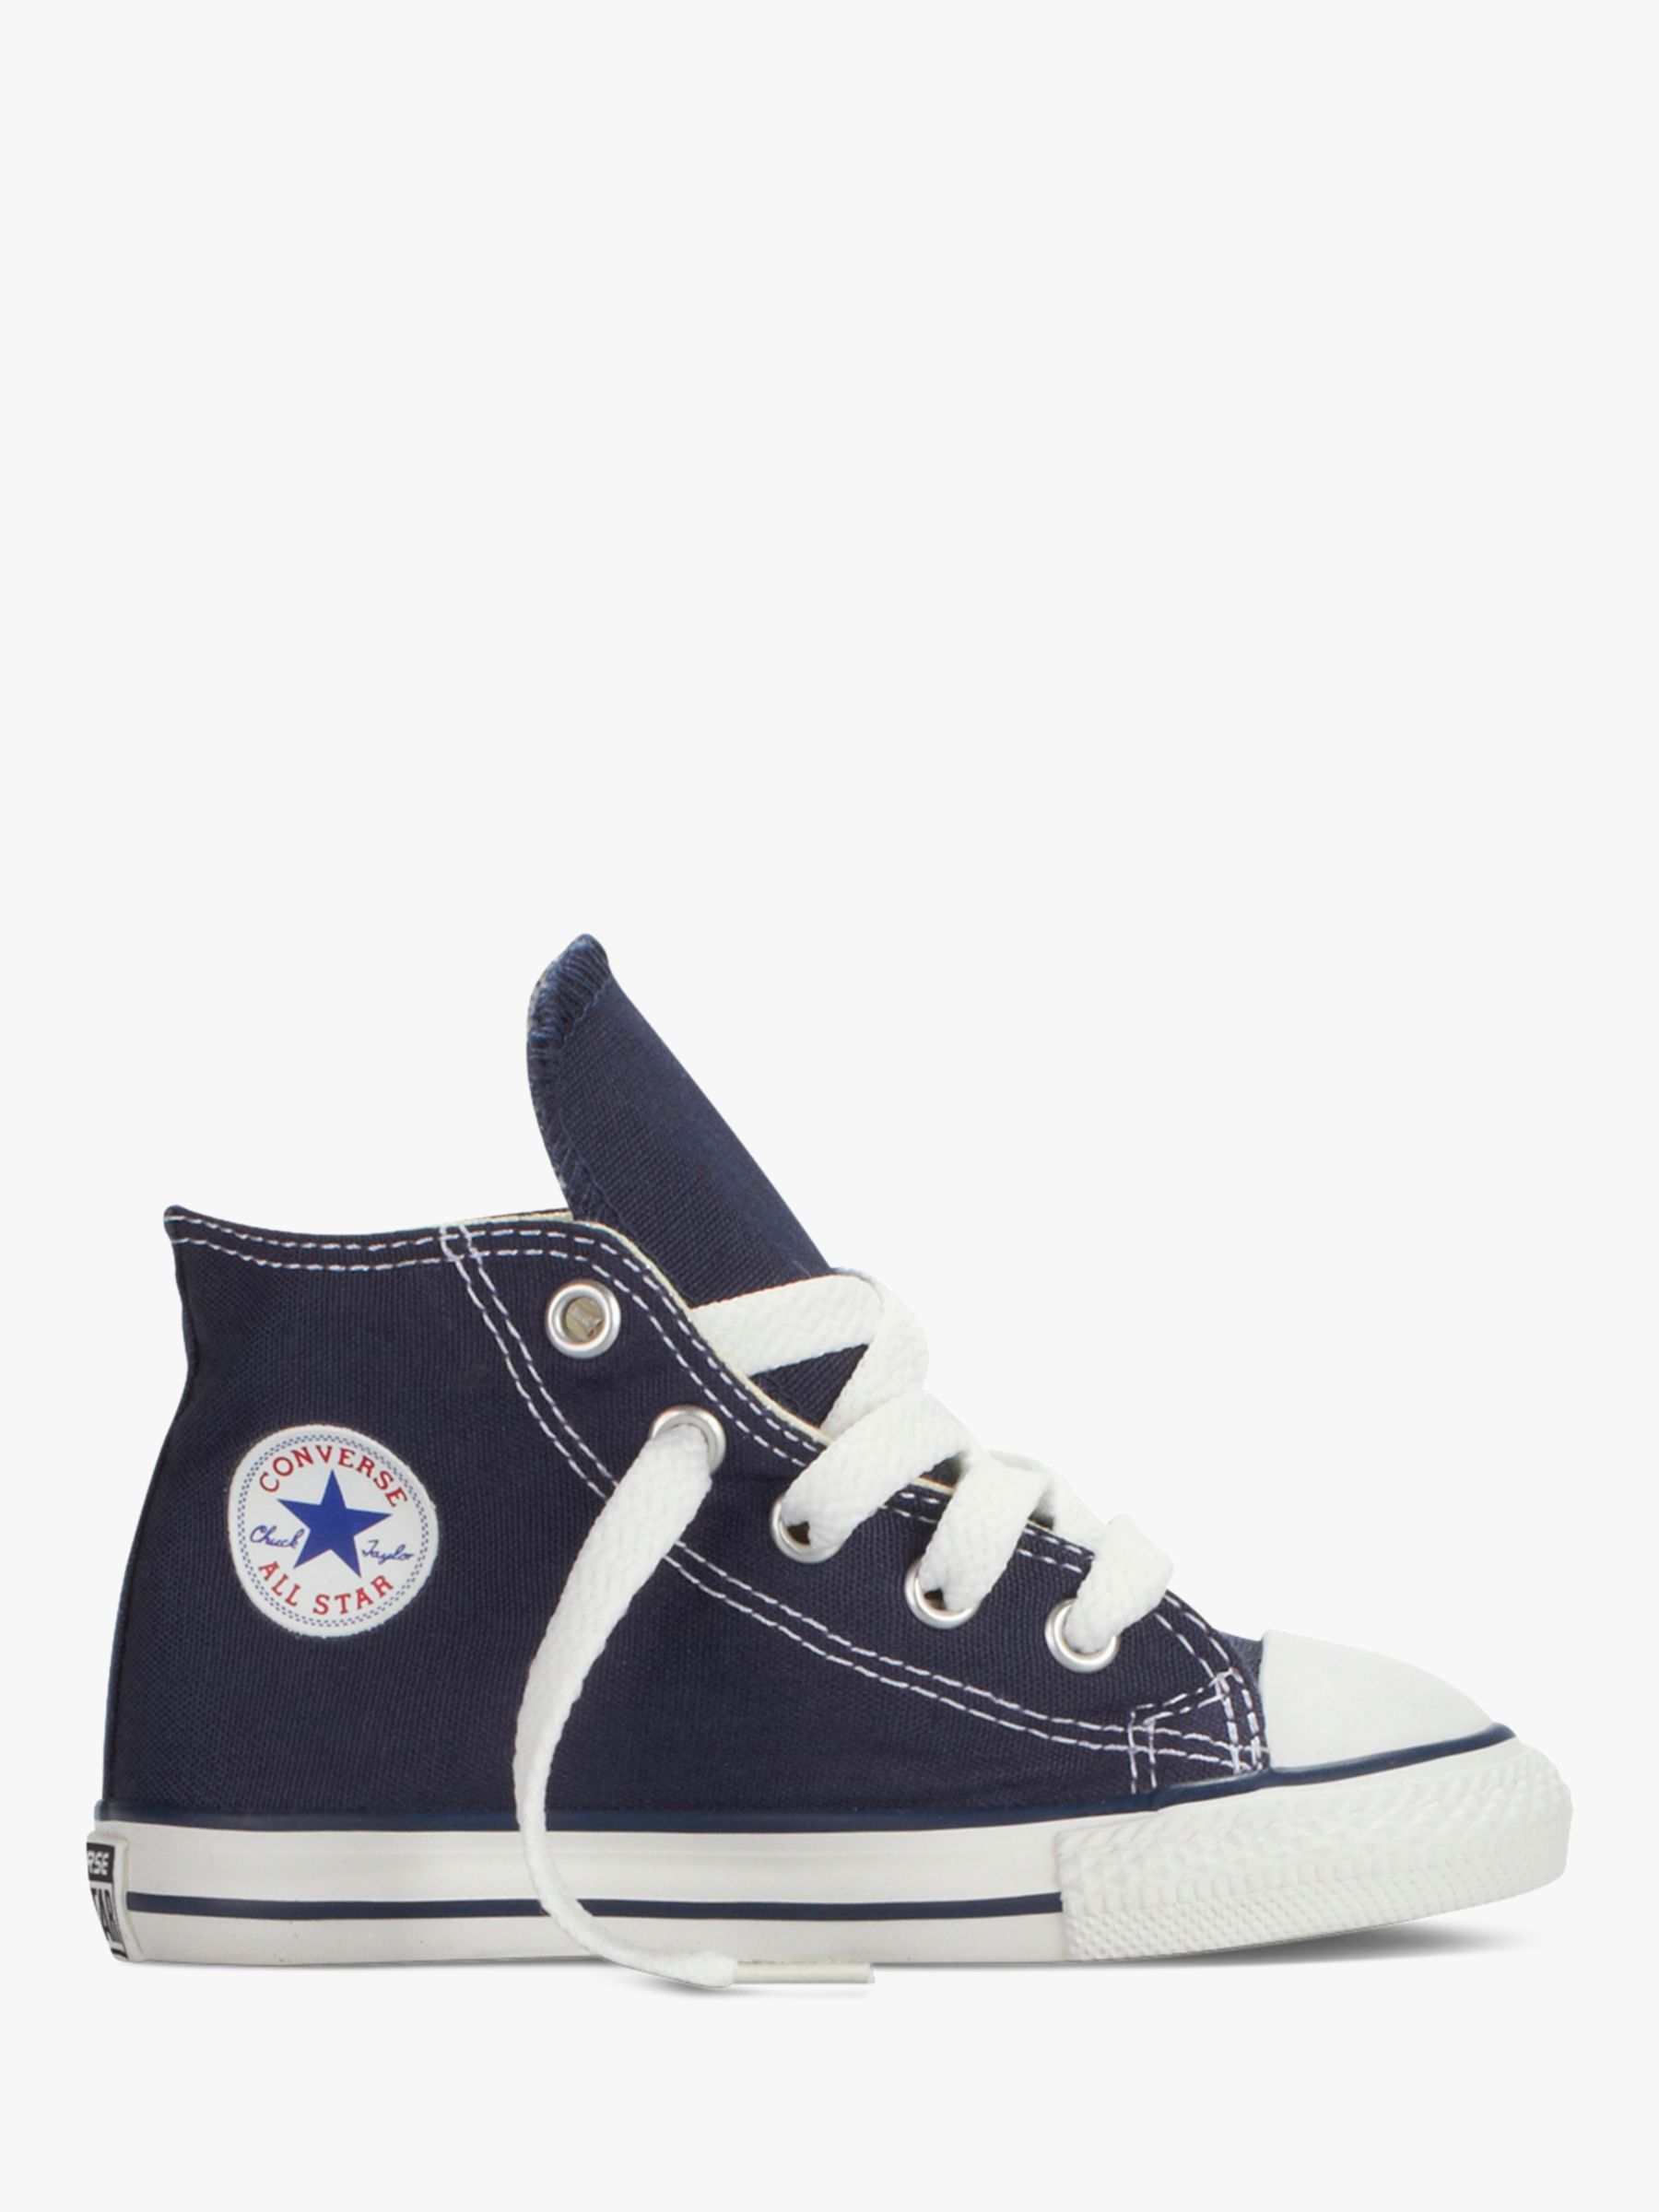 All Star Core-Hi Trainers, Navy, Size 13 Junior